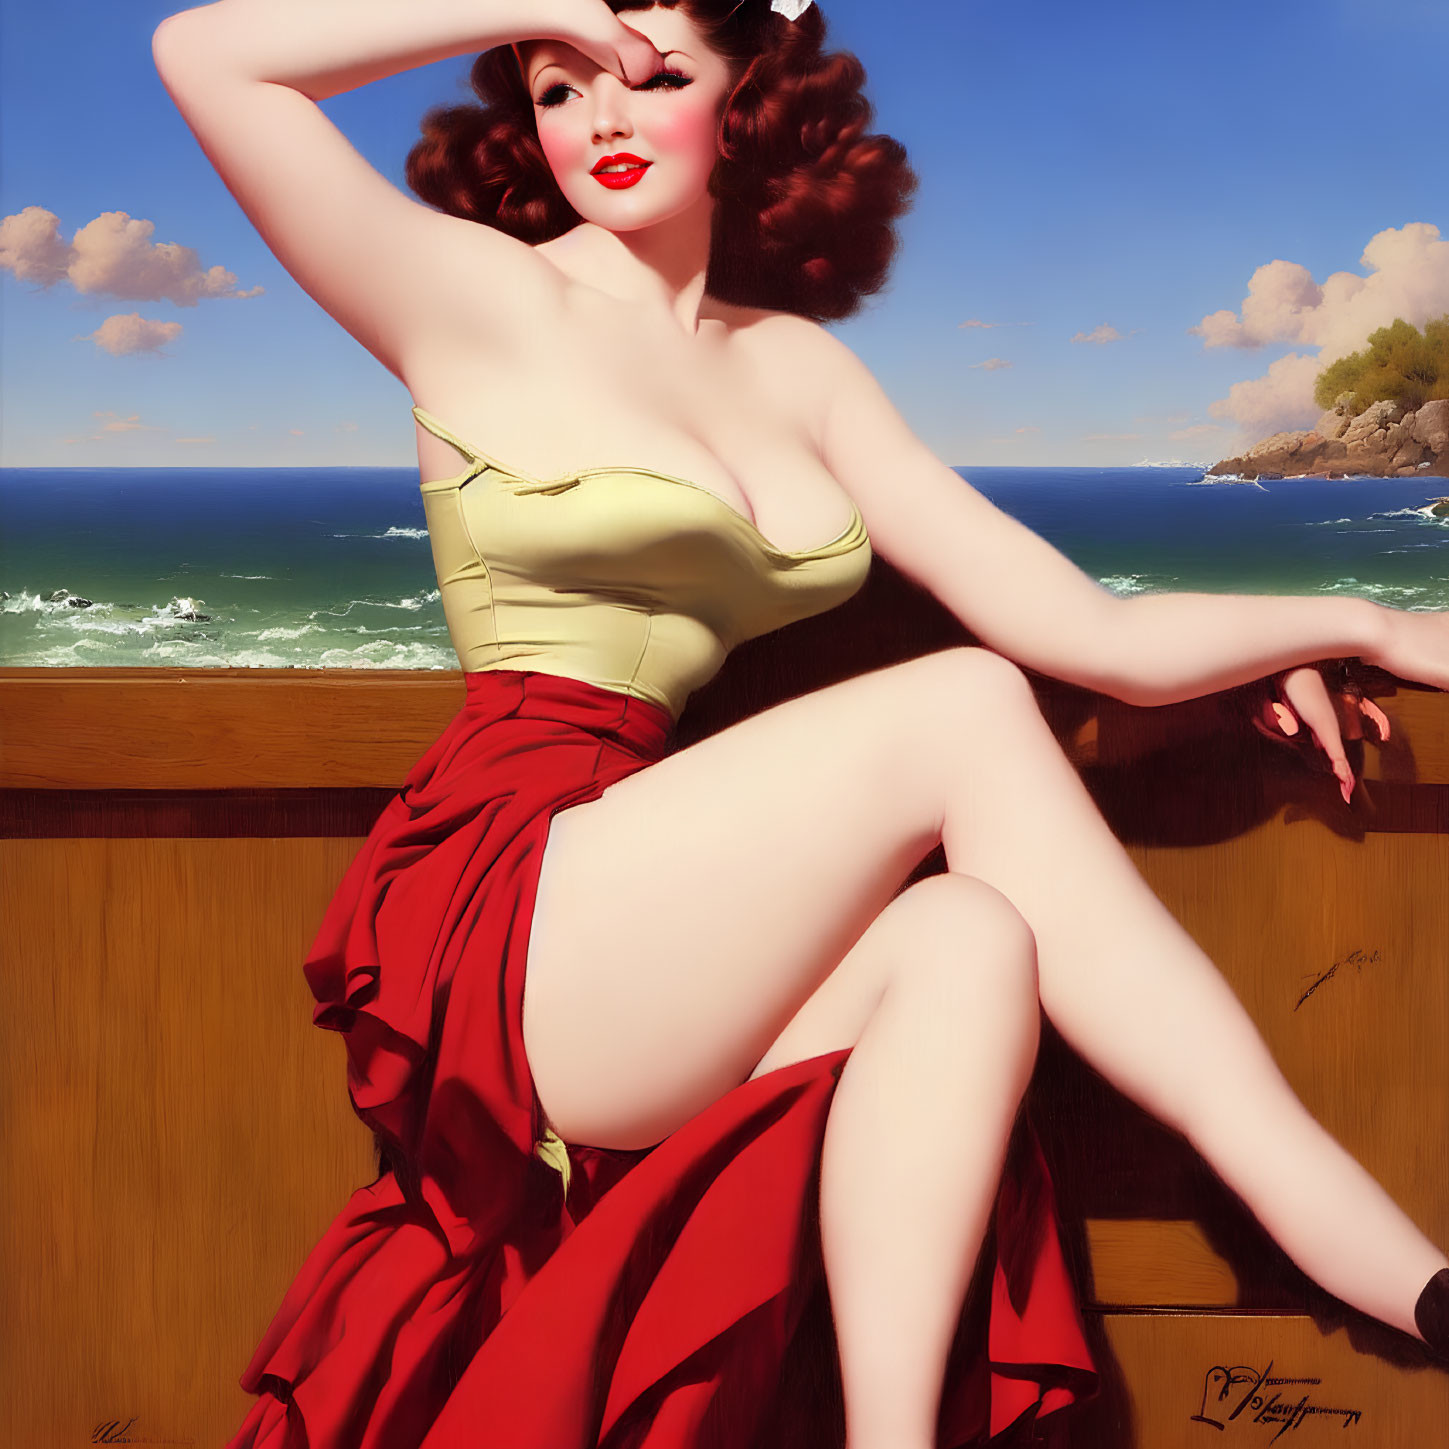 Vintage-Style Painting of Glamorous Woman by Seaside Railing